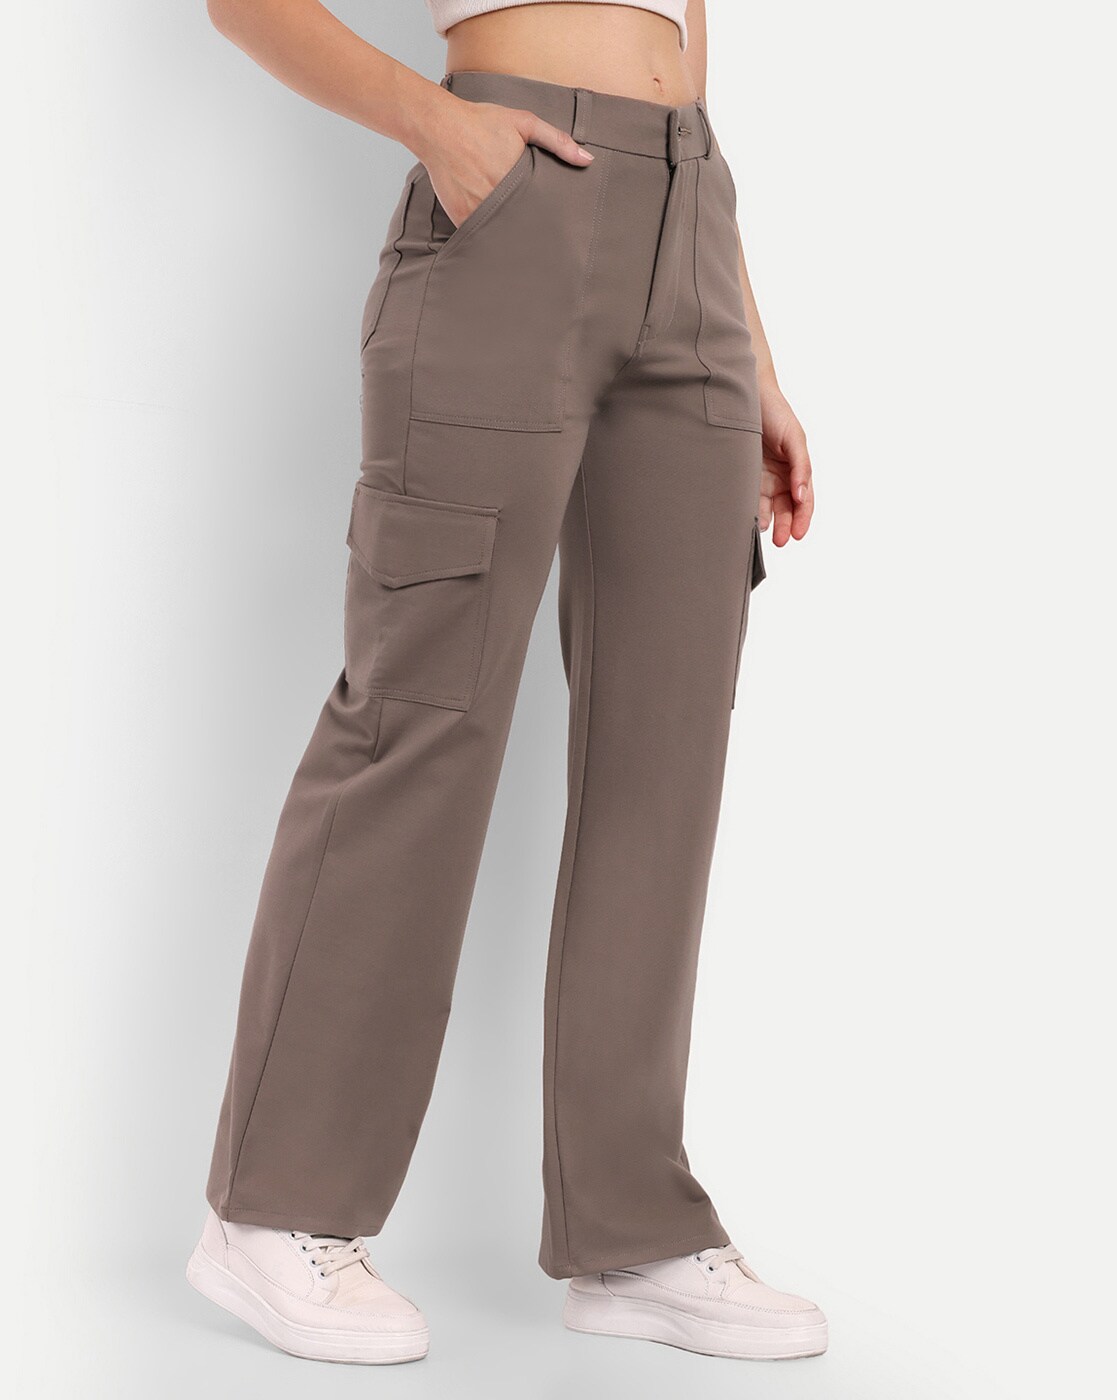 Buy tbase Mens Graphite Solid Cargo Pants for Men Online India